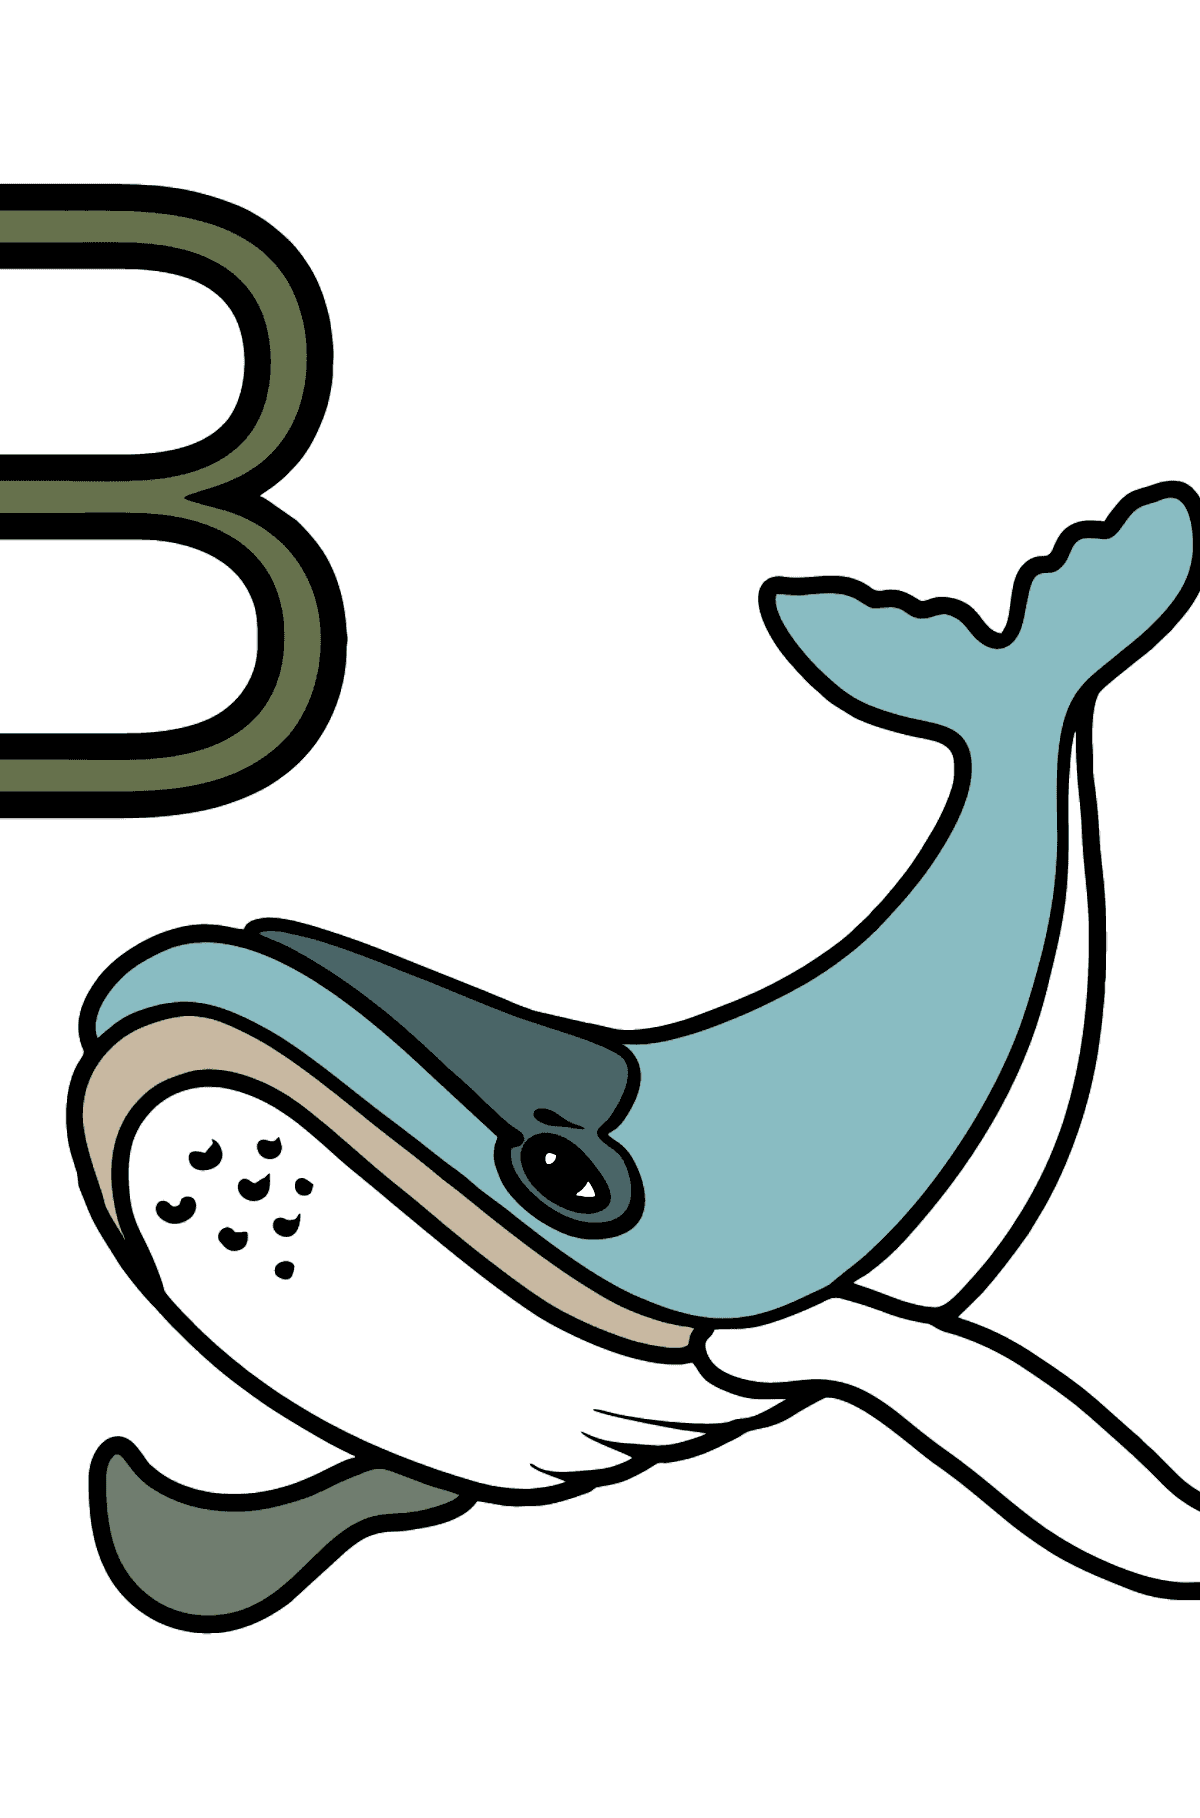 Spanish Letter B coloring pages - BALLENA - Coloring Pages for Kids